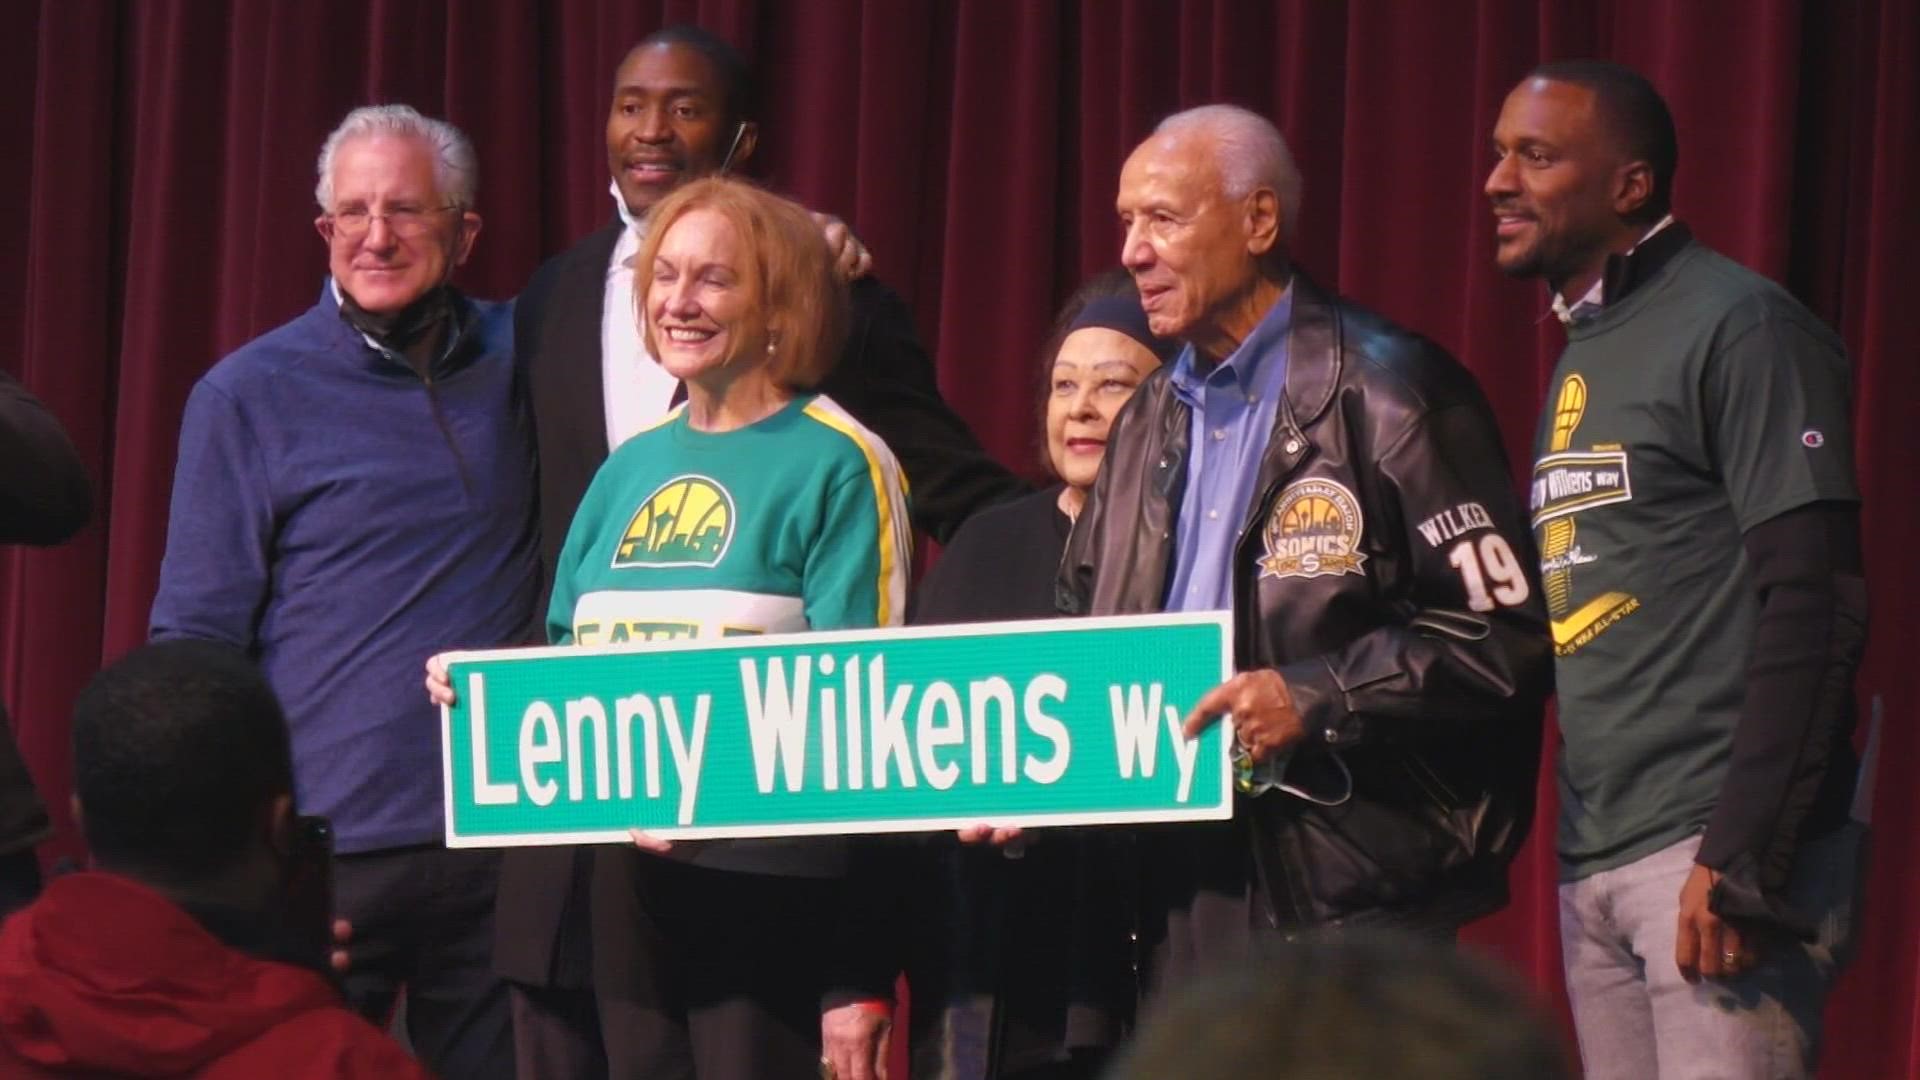 Thomas Street will be renamed after the former Sonics player and coach.